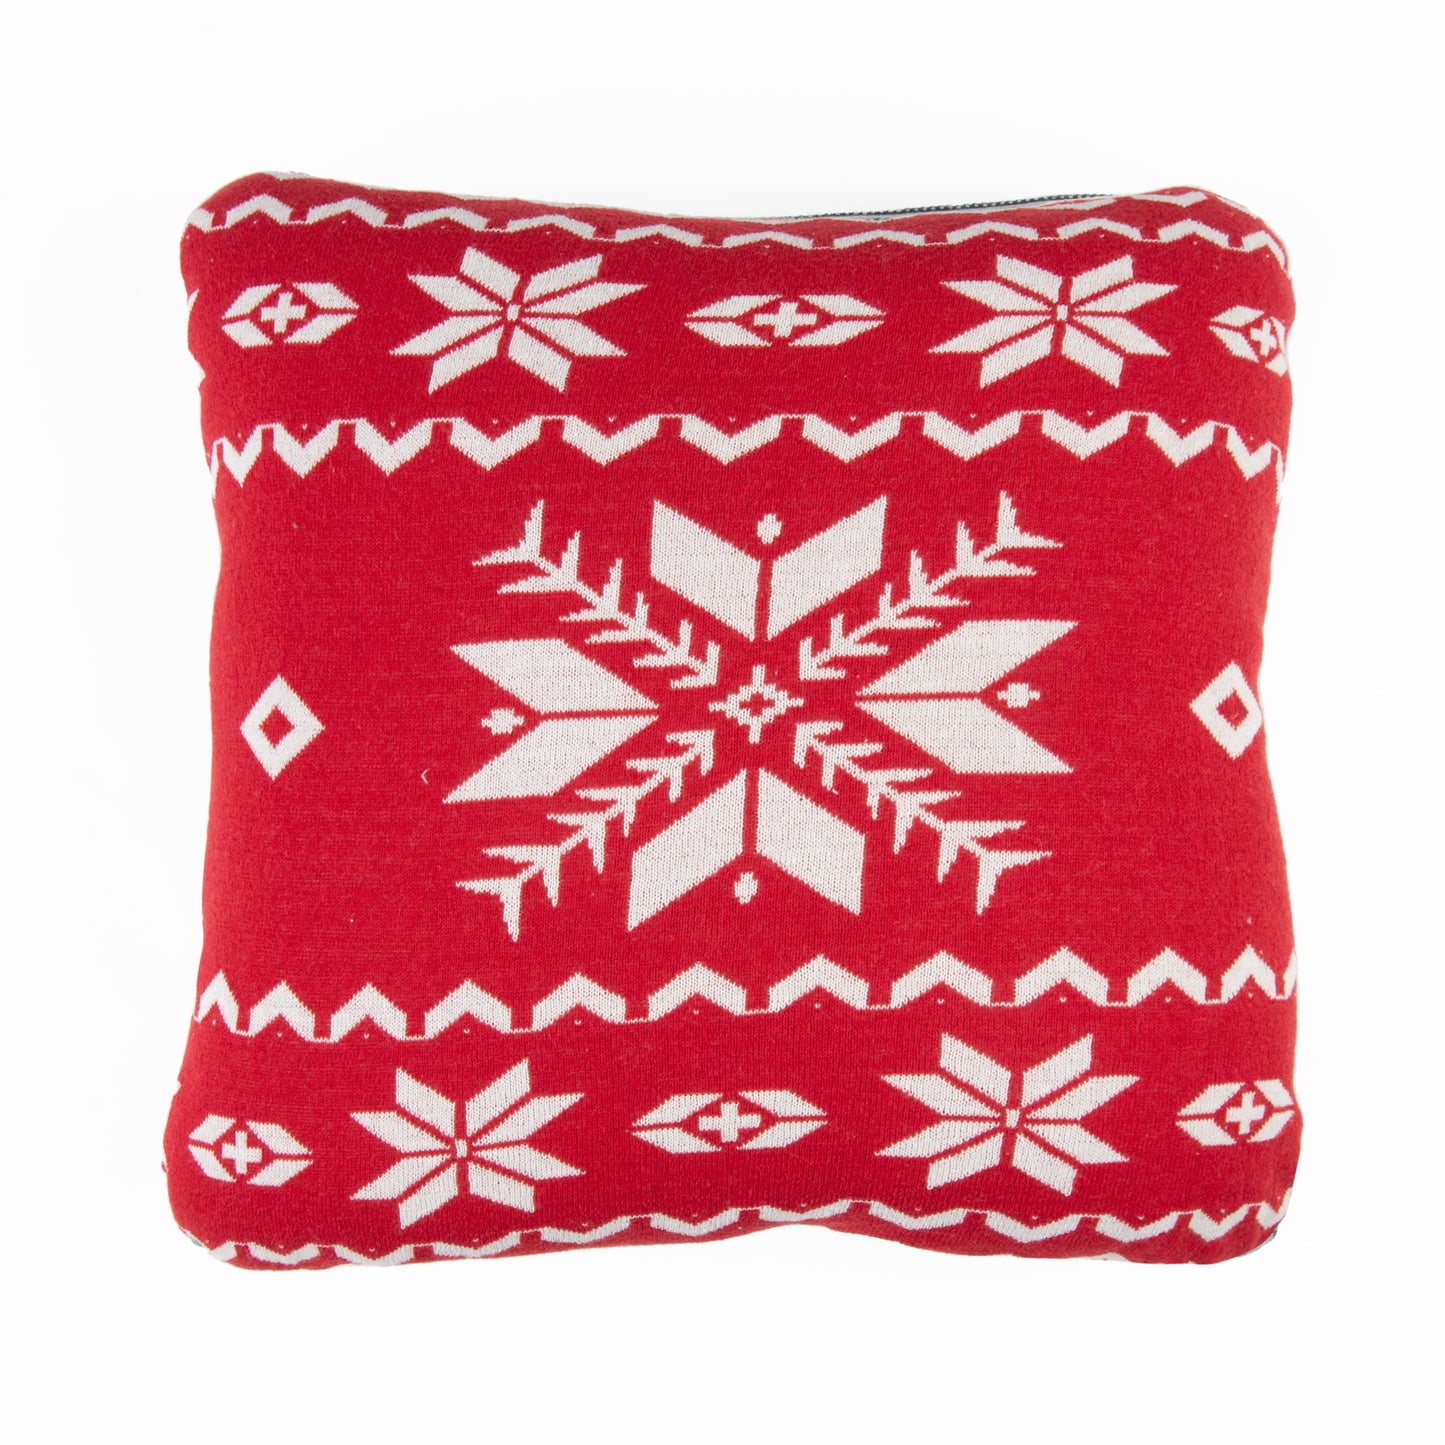 Kirsi 18x18" Recycled Cotton Reversible Decorative Holiday Pillow